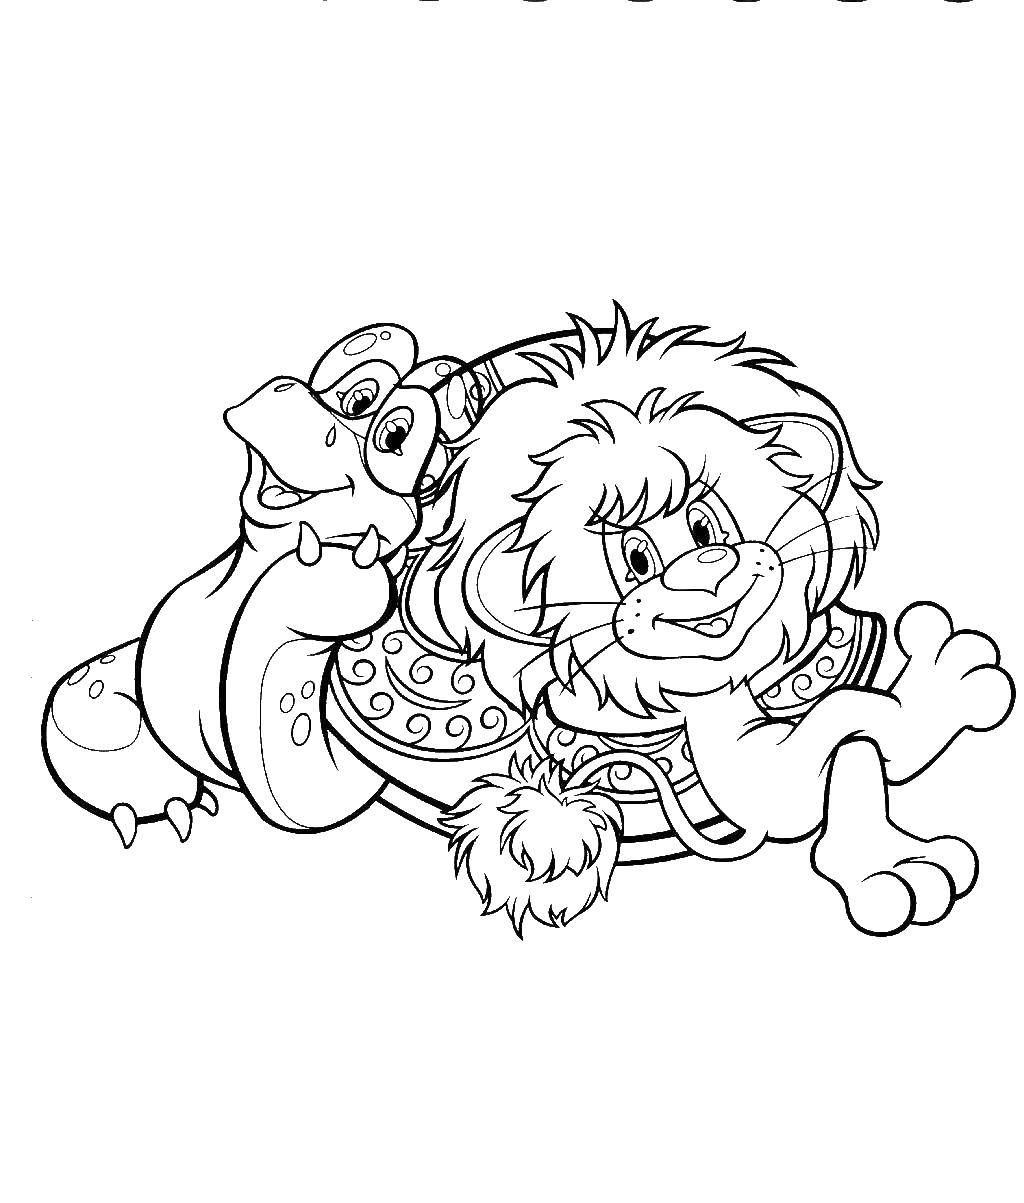 Coloring Lion cub and a large turtle. Category cartoons. Tags:  cartoons, turtle, lion.